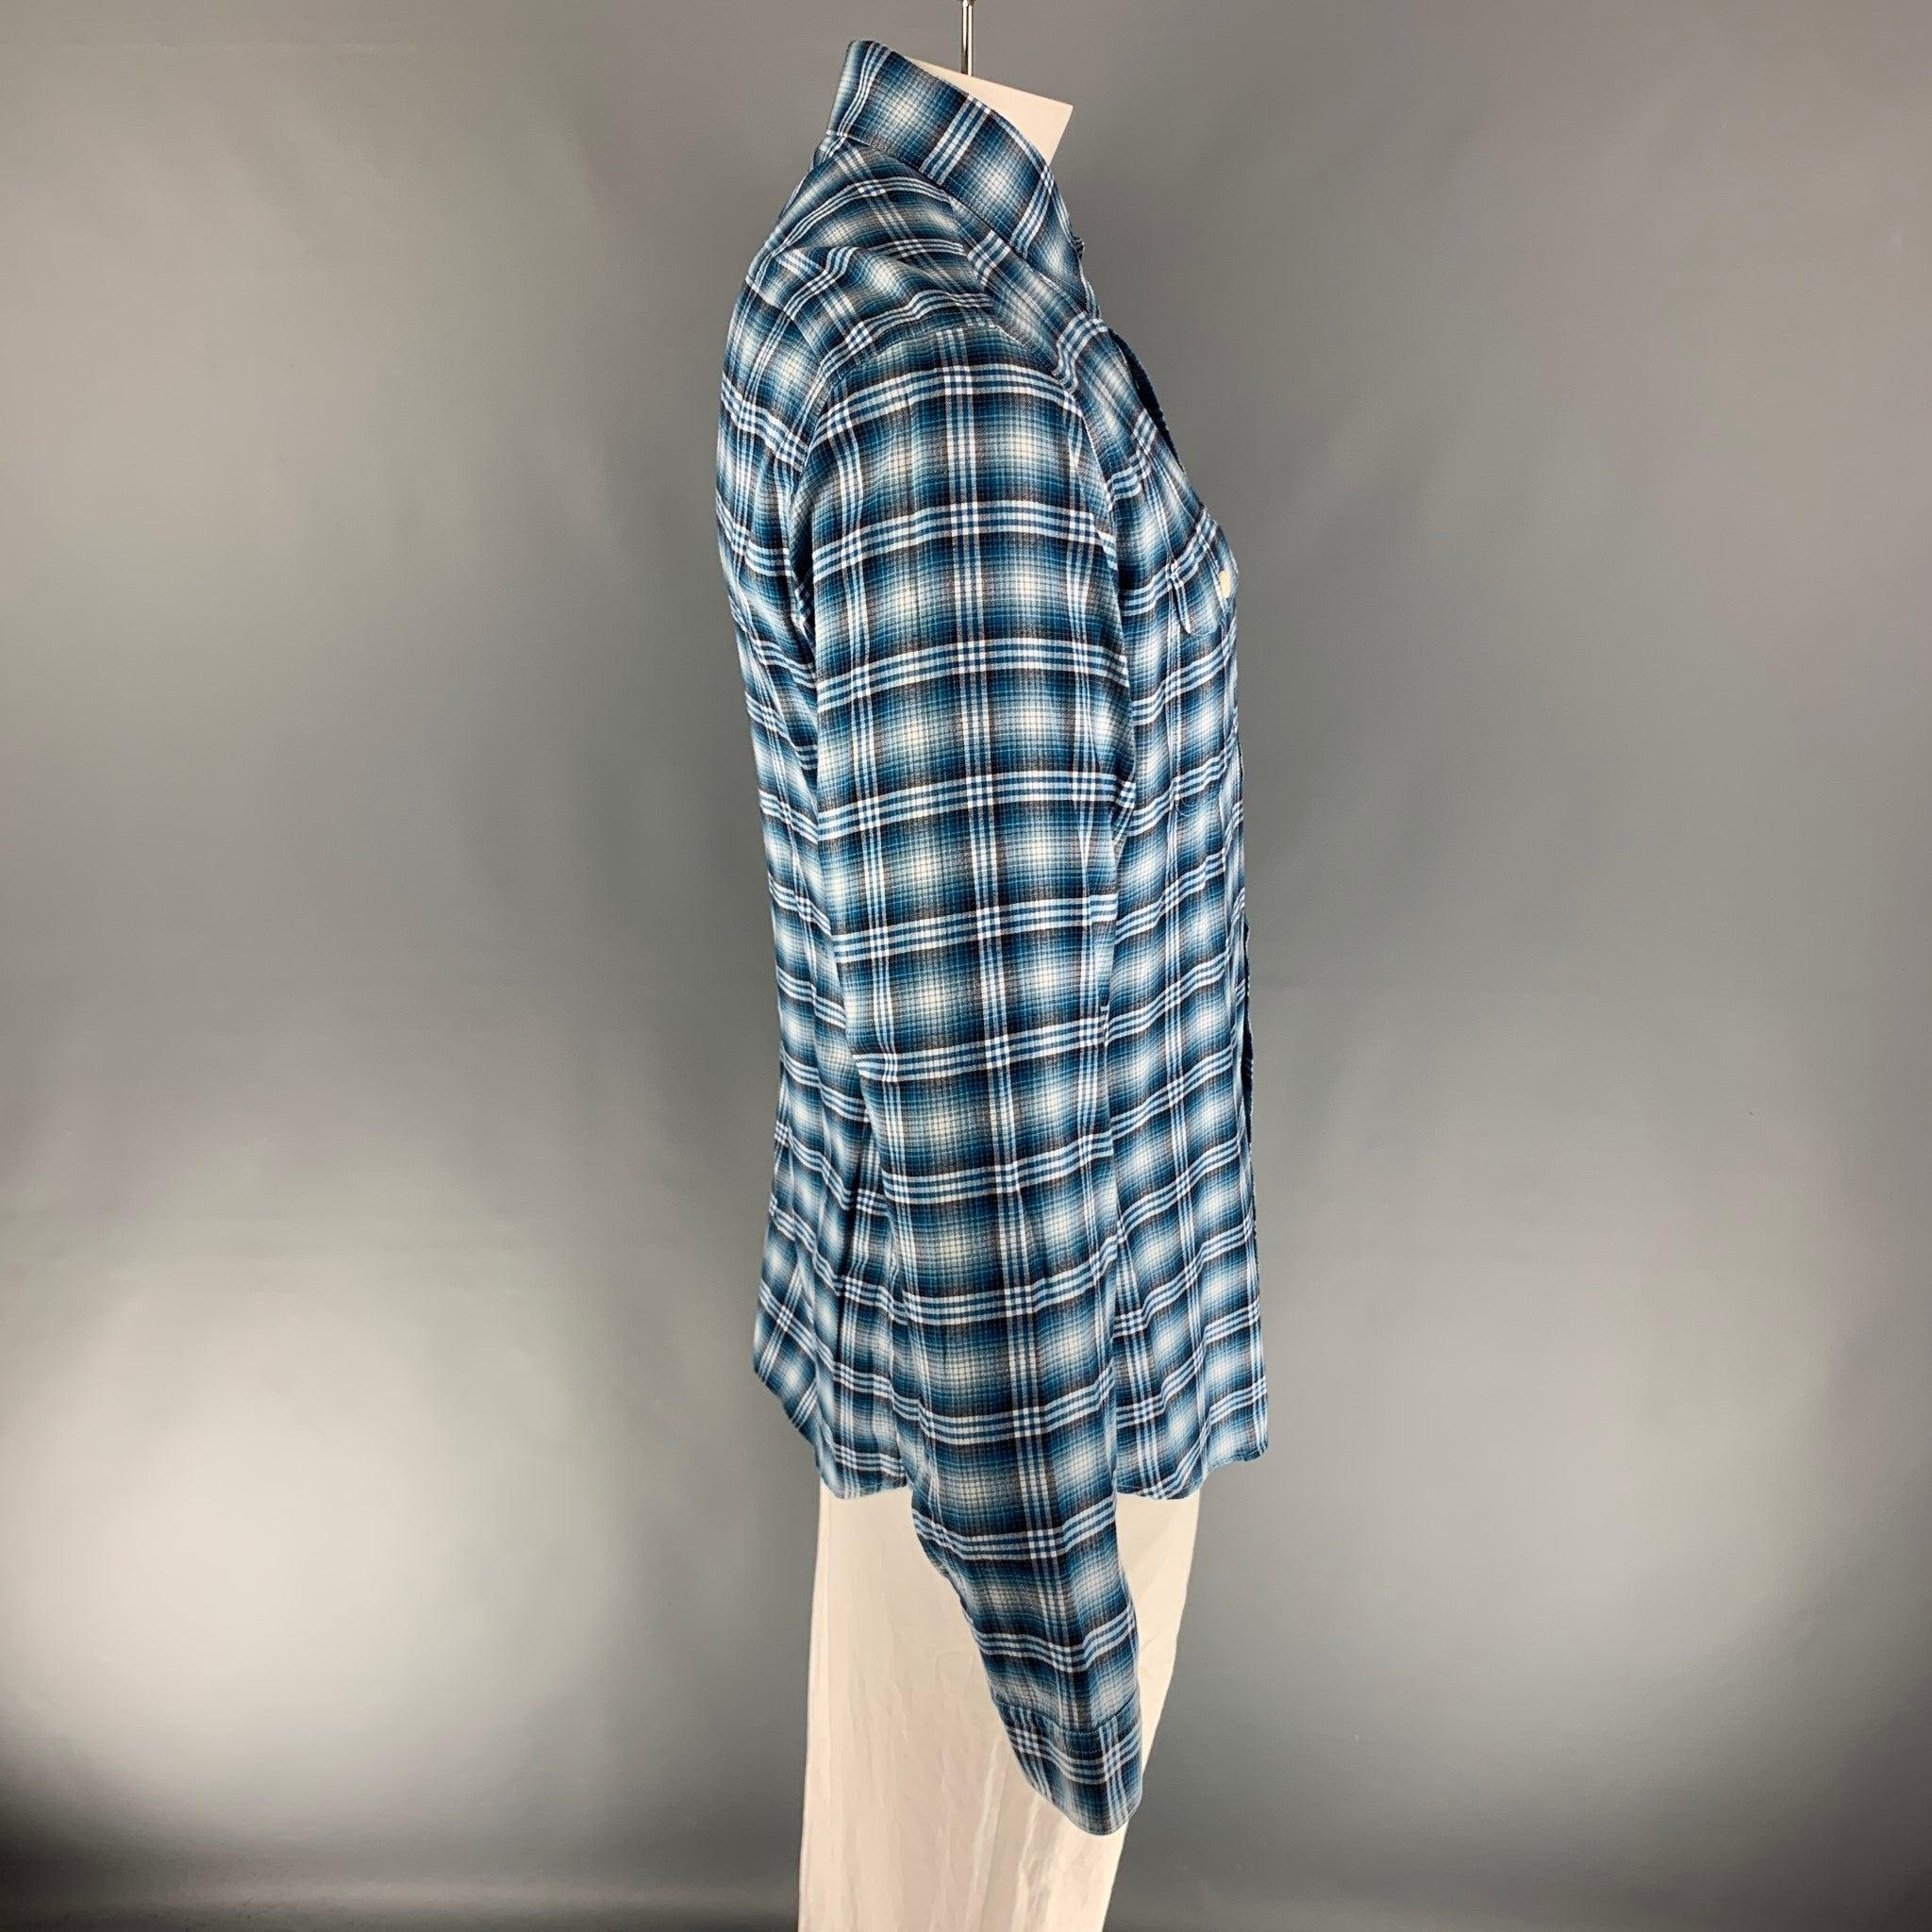 TOM FORD long sleeve button down flannel comes in a turquoise & white plaid pattern with two front patch pockets, as well as a spread collar. 100% cotton.
Very Good Pre-Owned Condition. 

Marked:   44 & 17 1/2
 

Measurements: 
  
Shoulder: 19.5